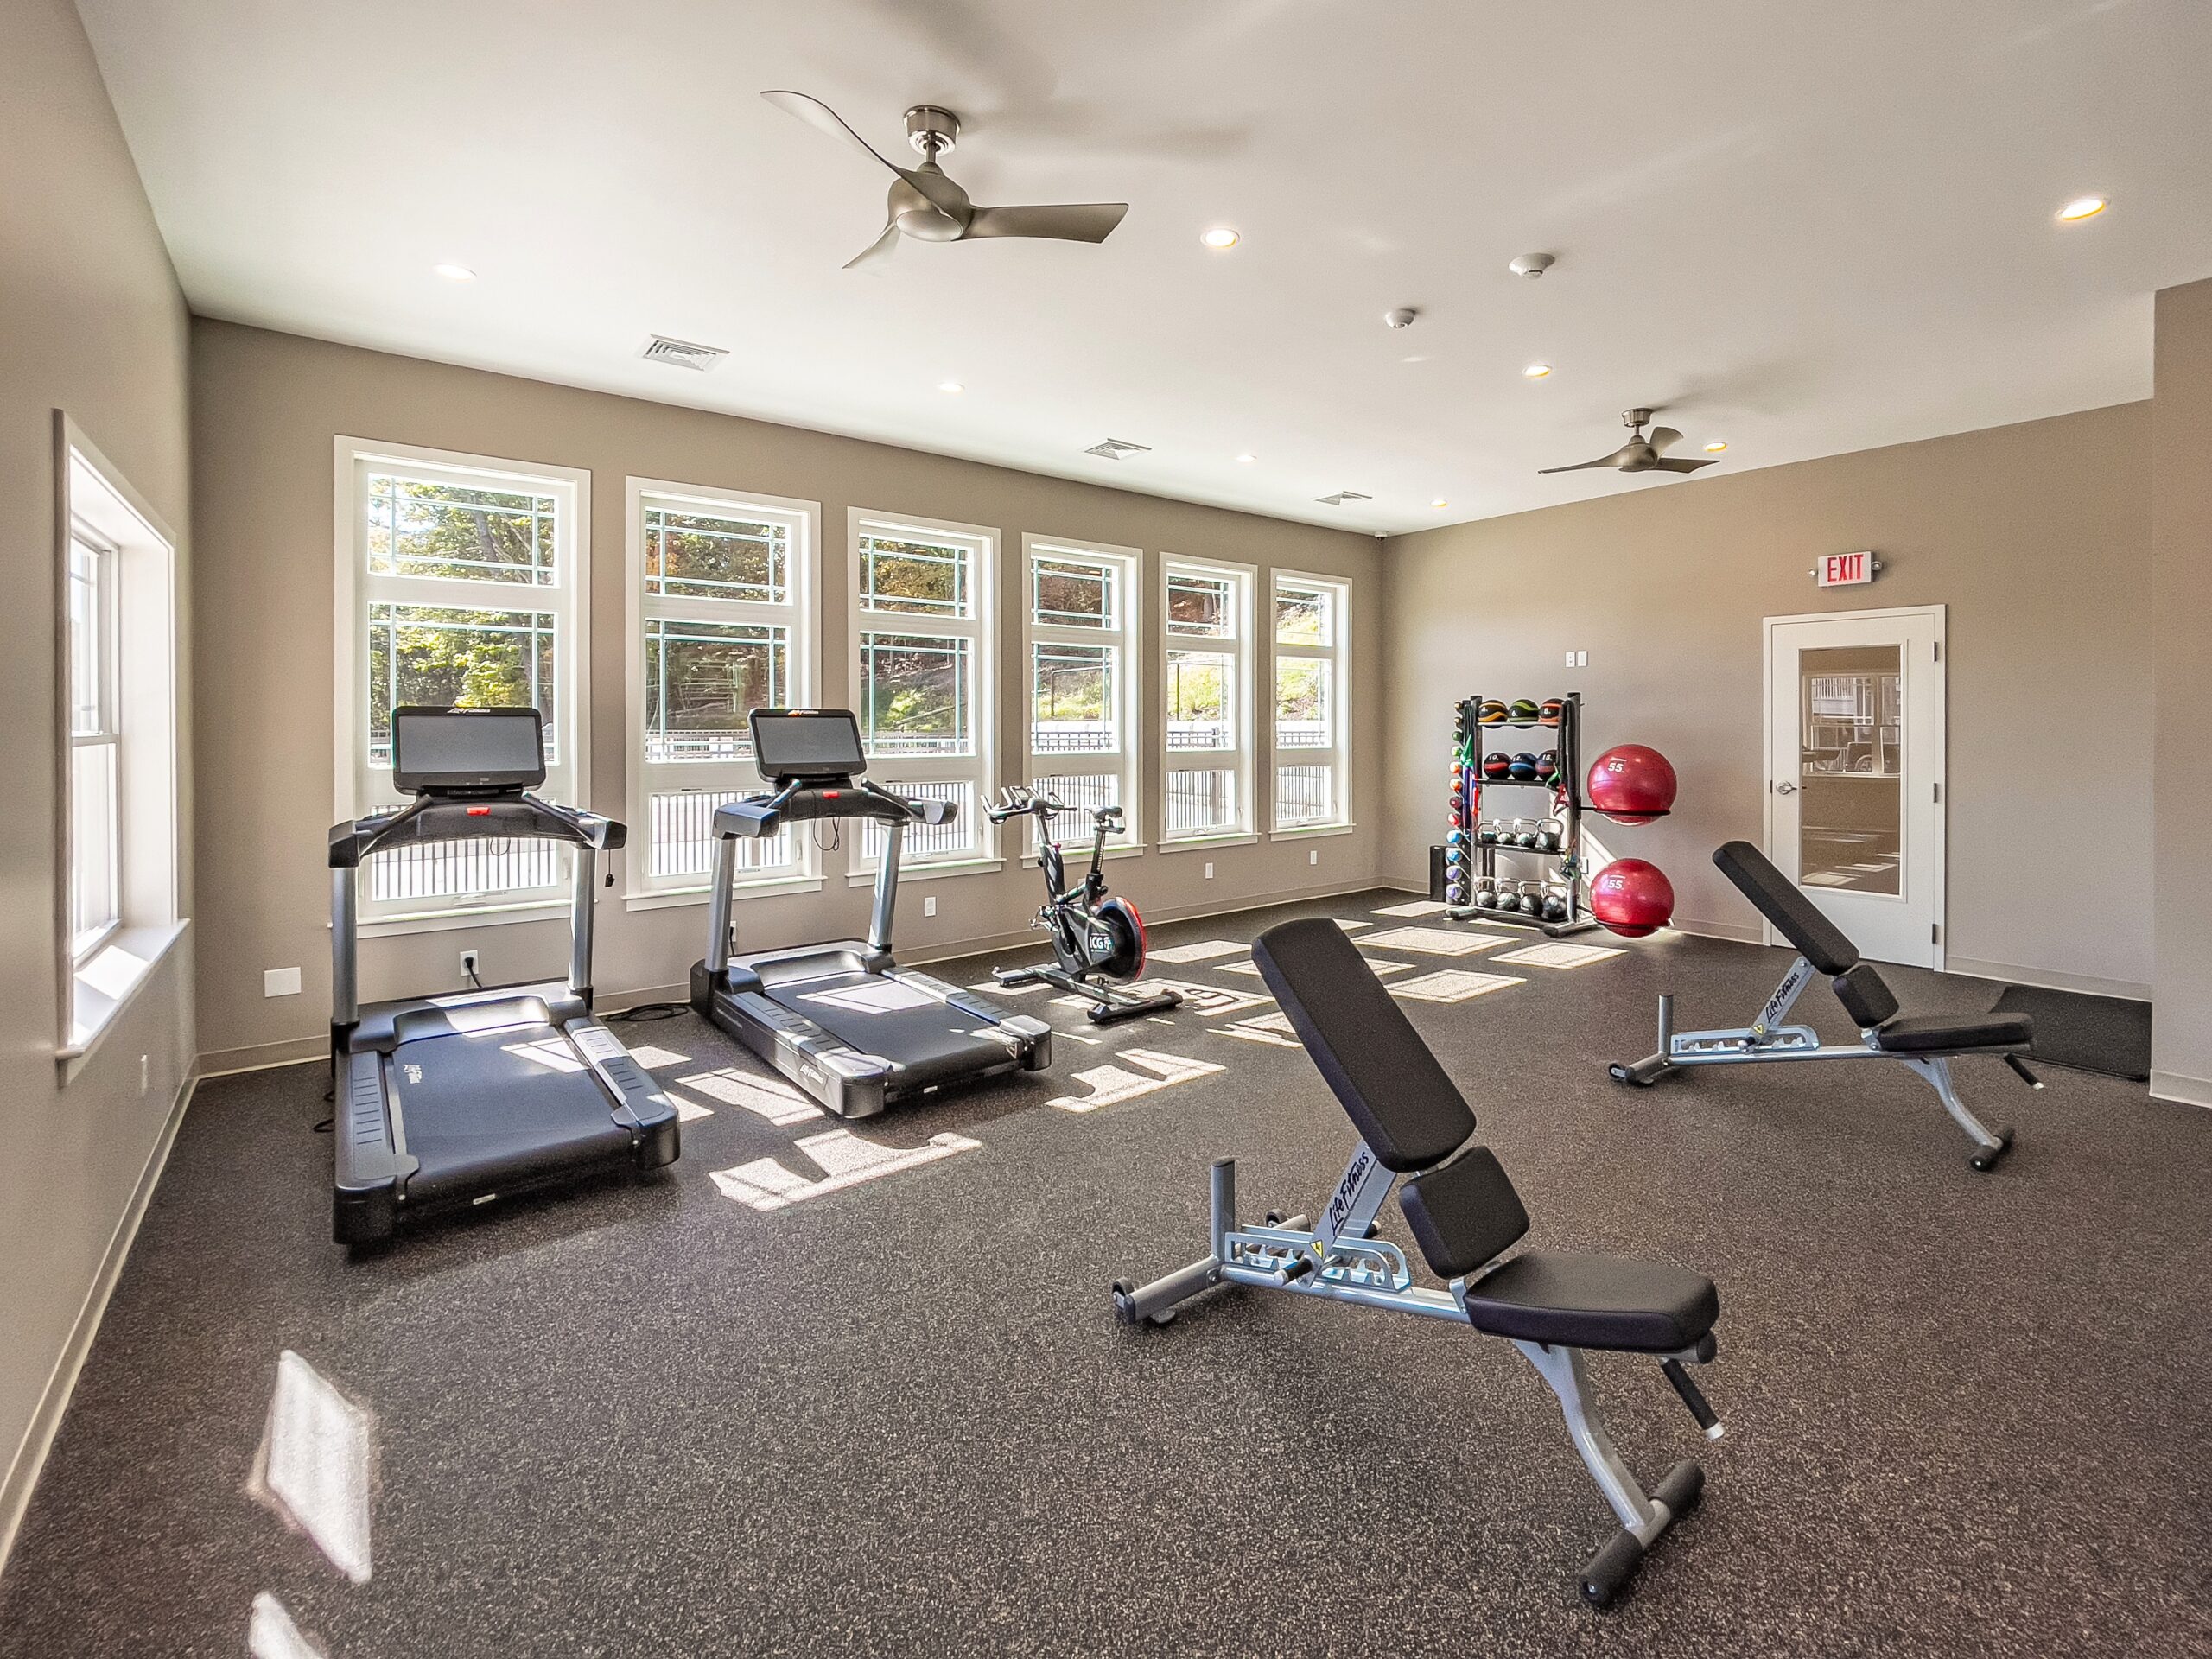 exercise room with treadmills, benches and lots of natural light